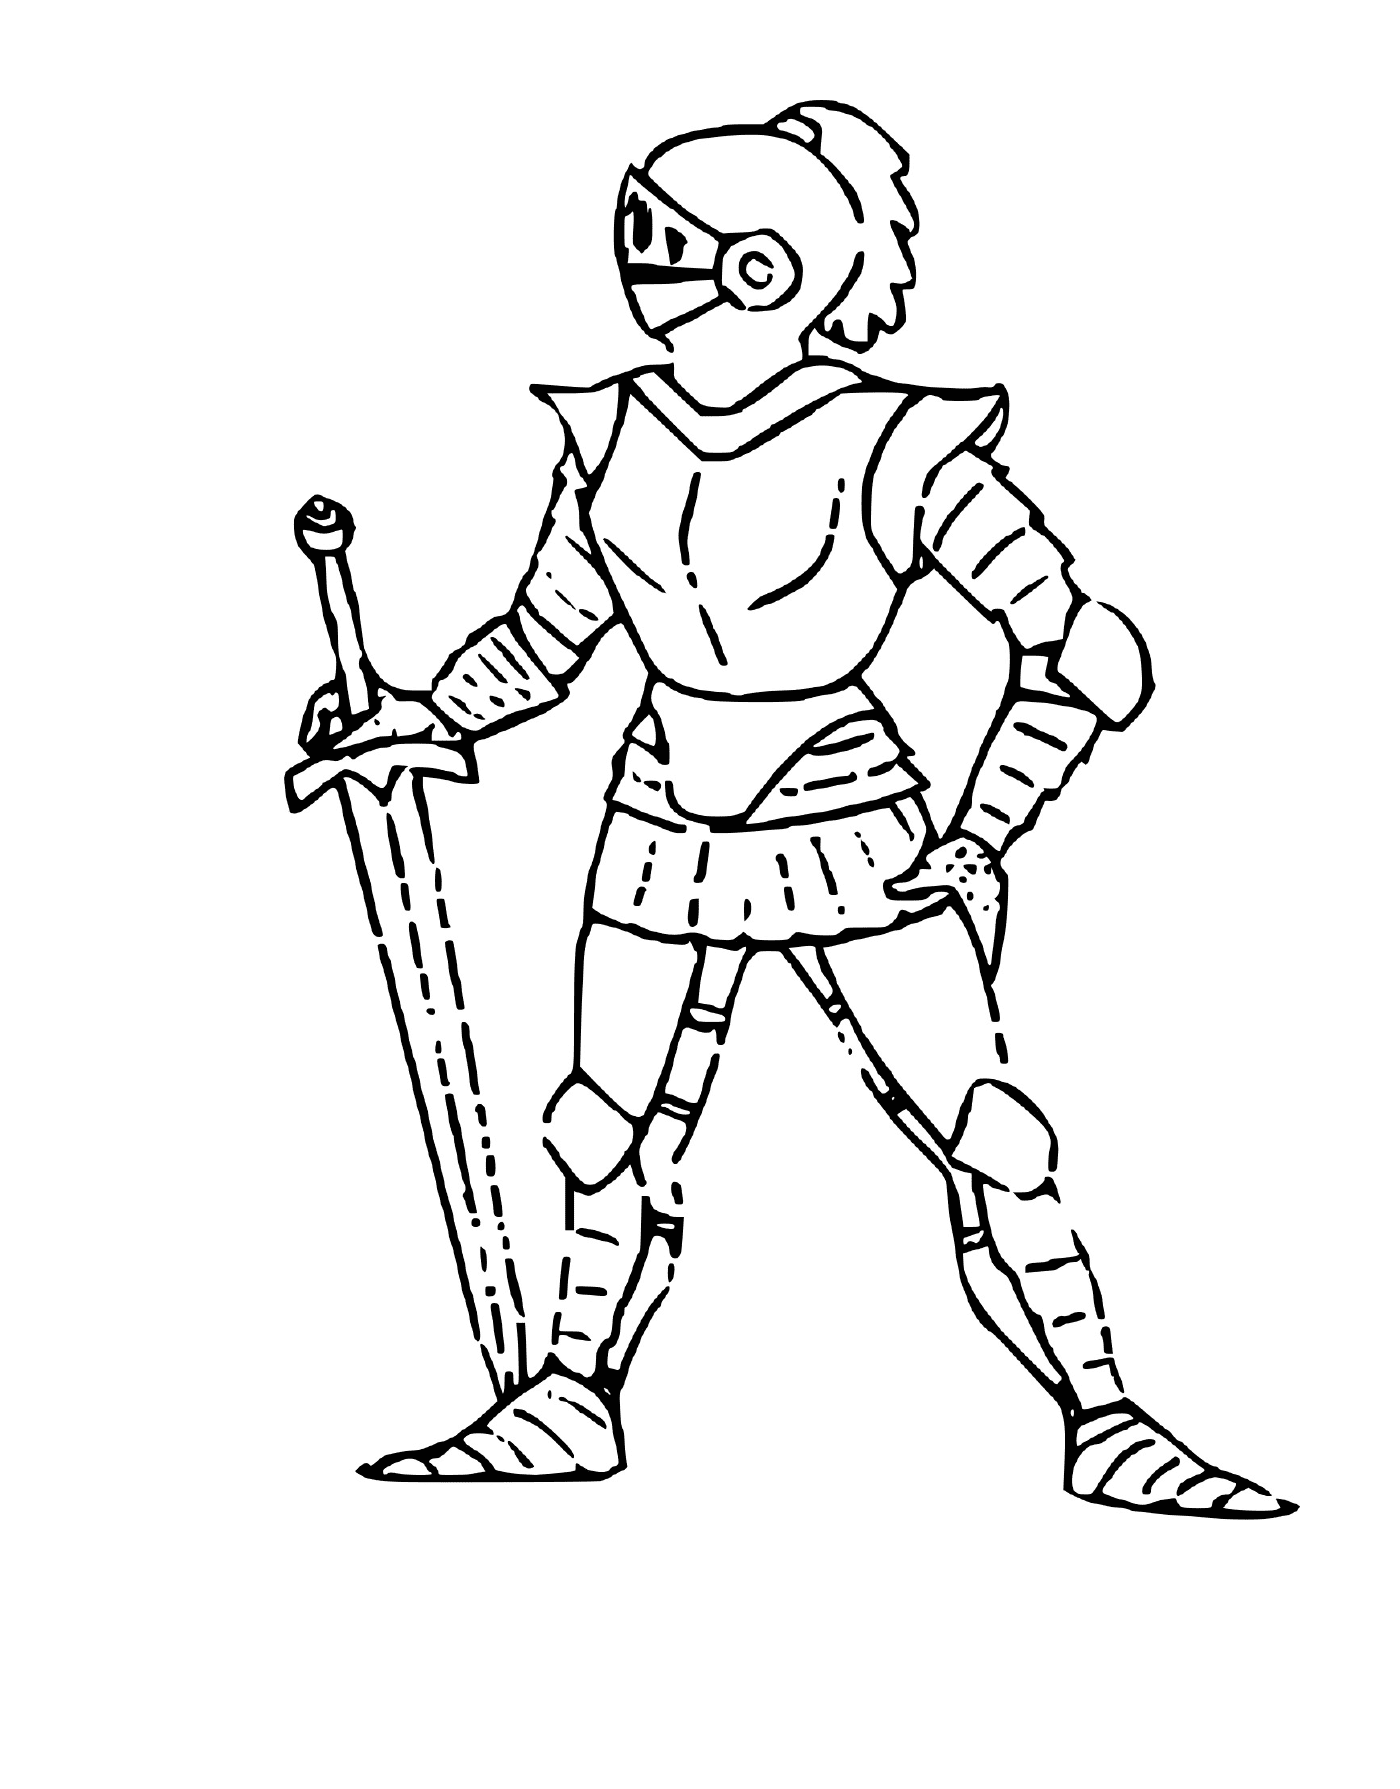  A man in armor holding a sword 